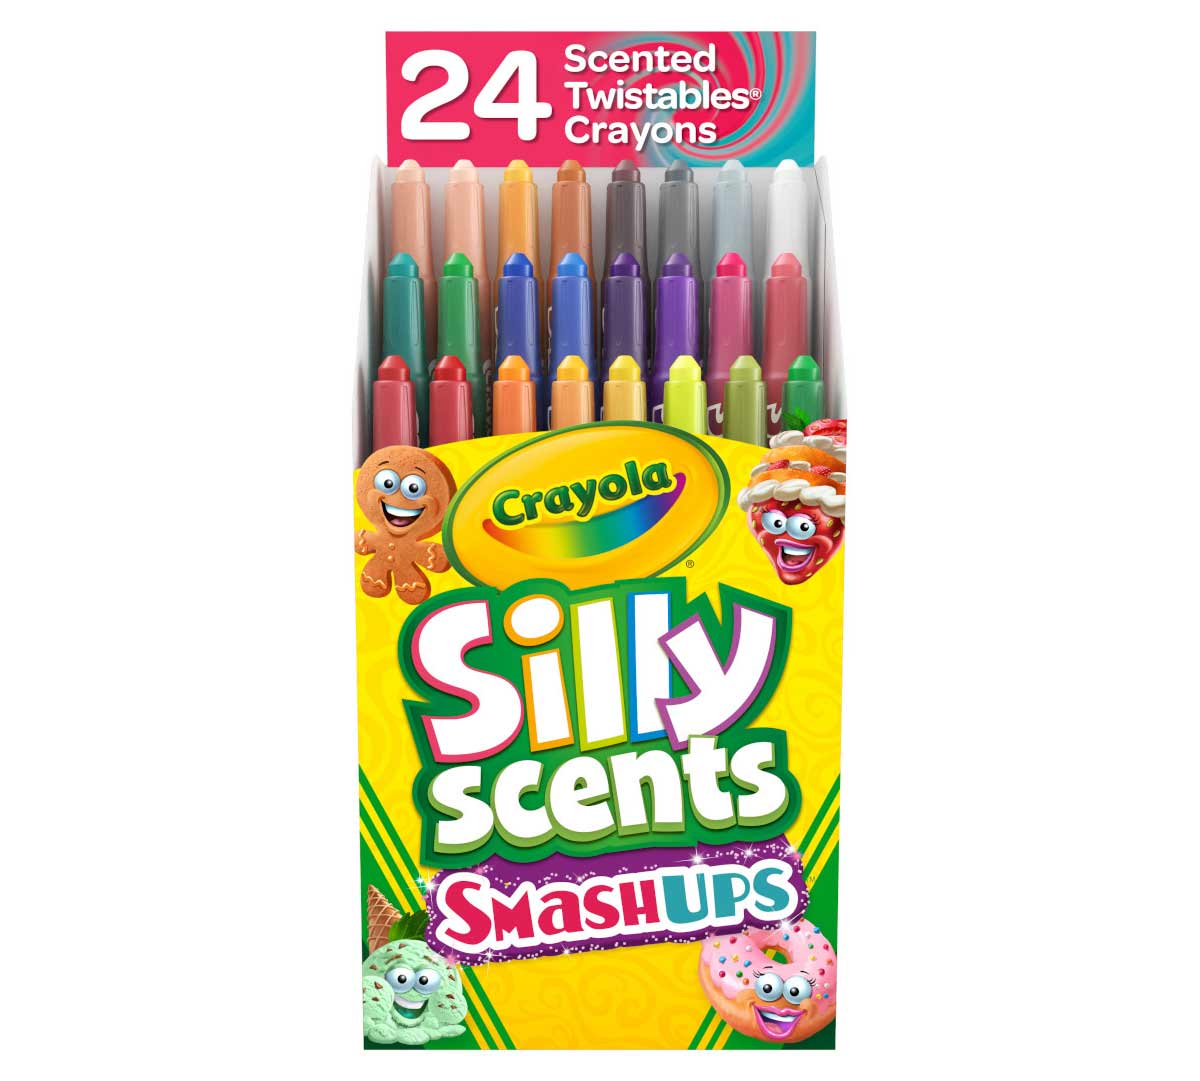 Crayola Silly Scents Mini Twistables Crayons 